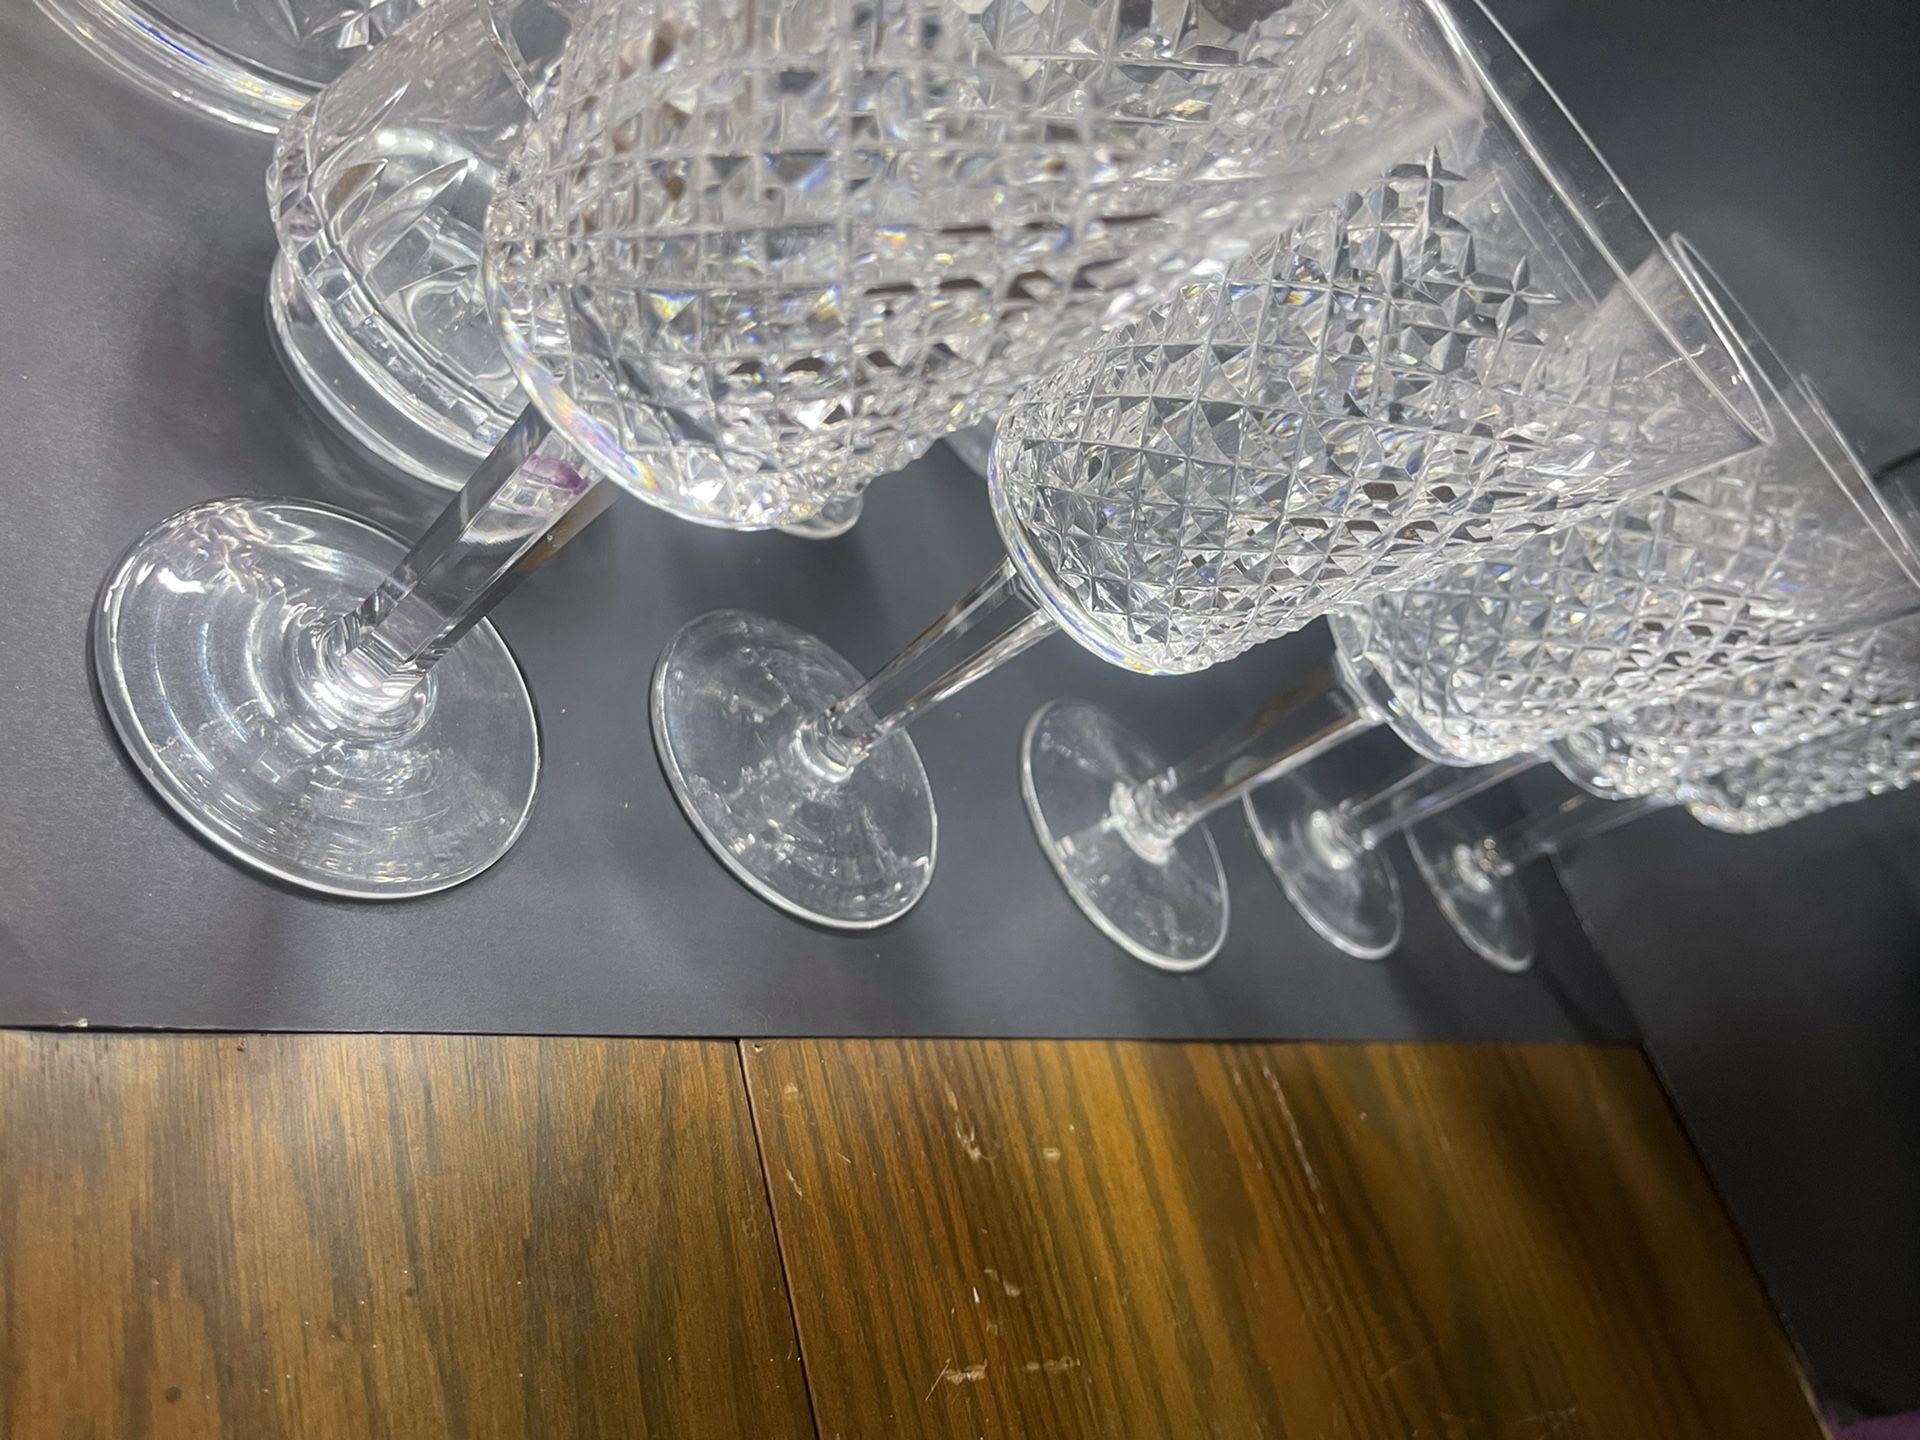 Waterford Irish Crystal 1000$ For Set Over 30 Pieces Total!!! DEAL OF THE CENTERY 